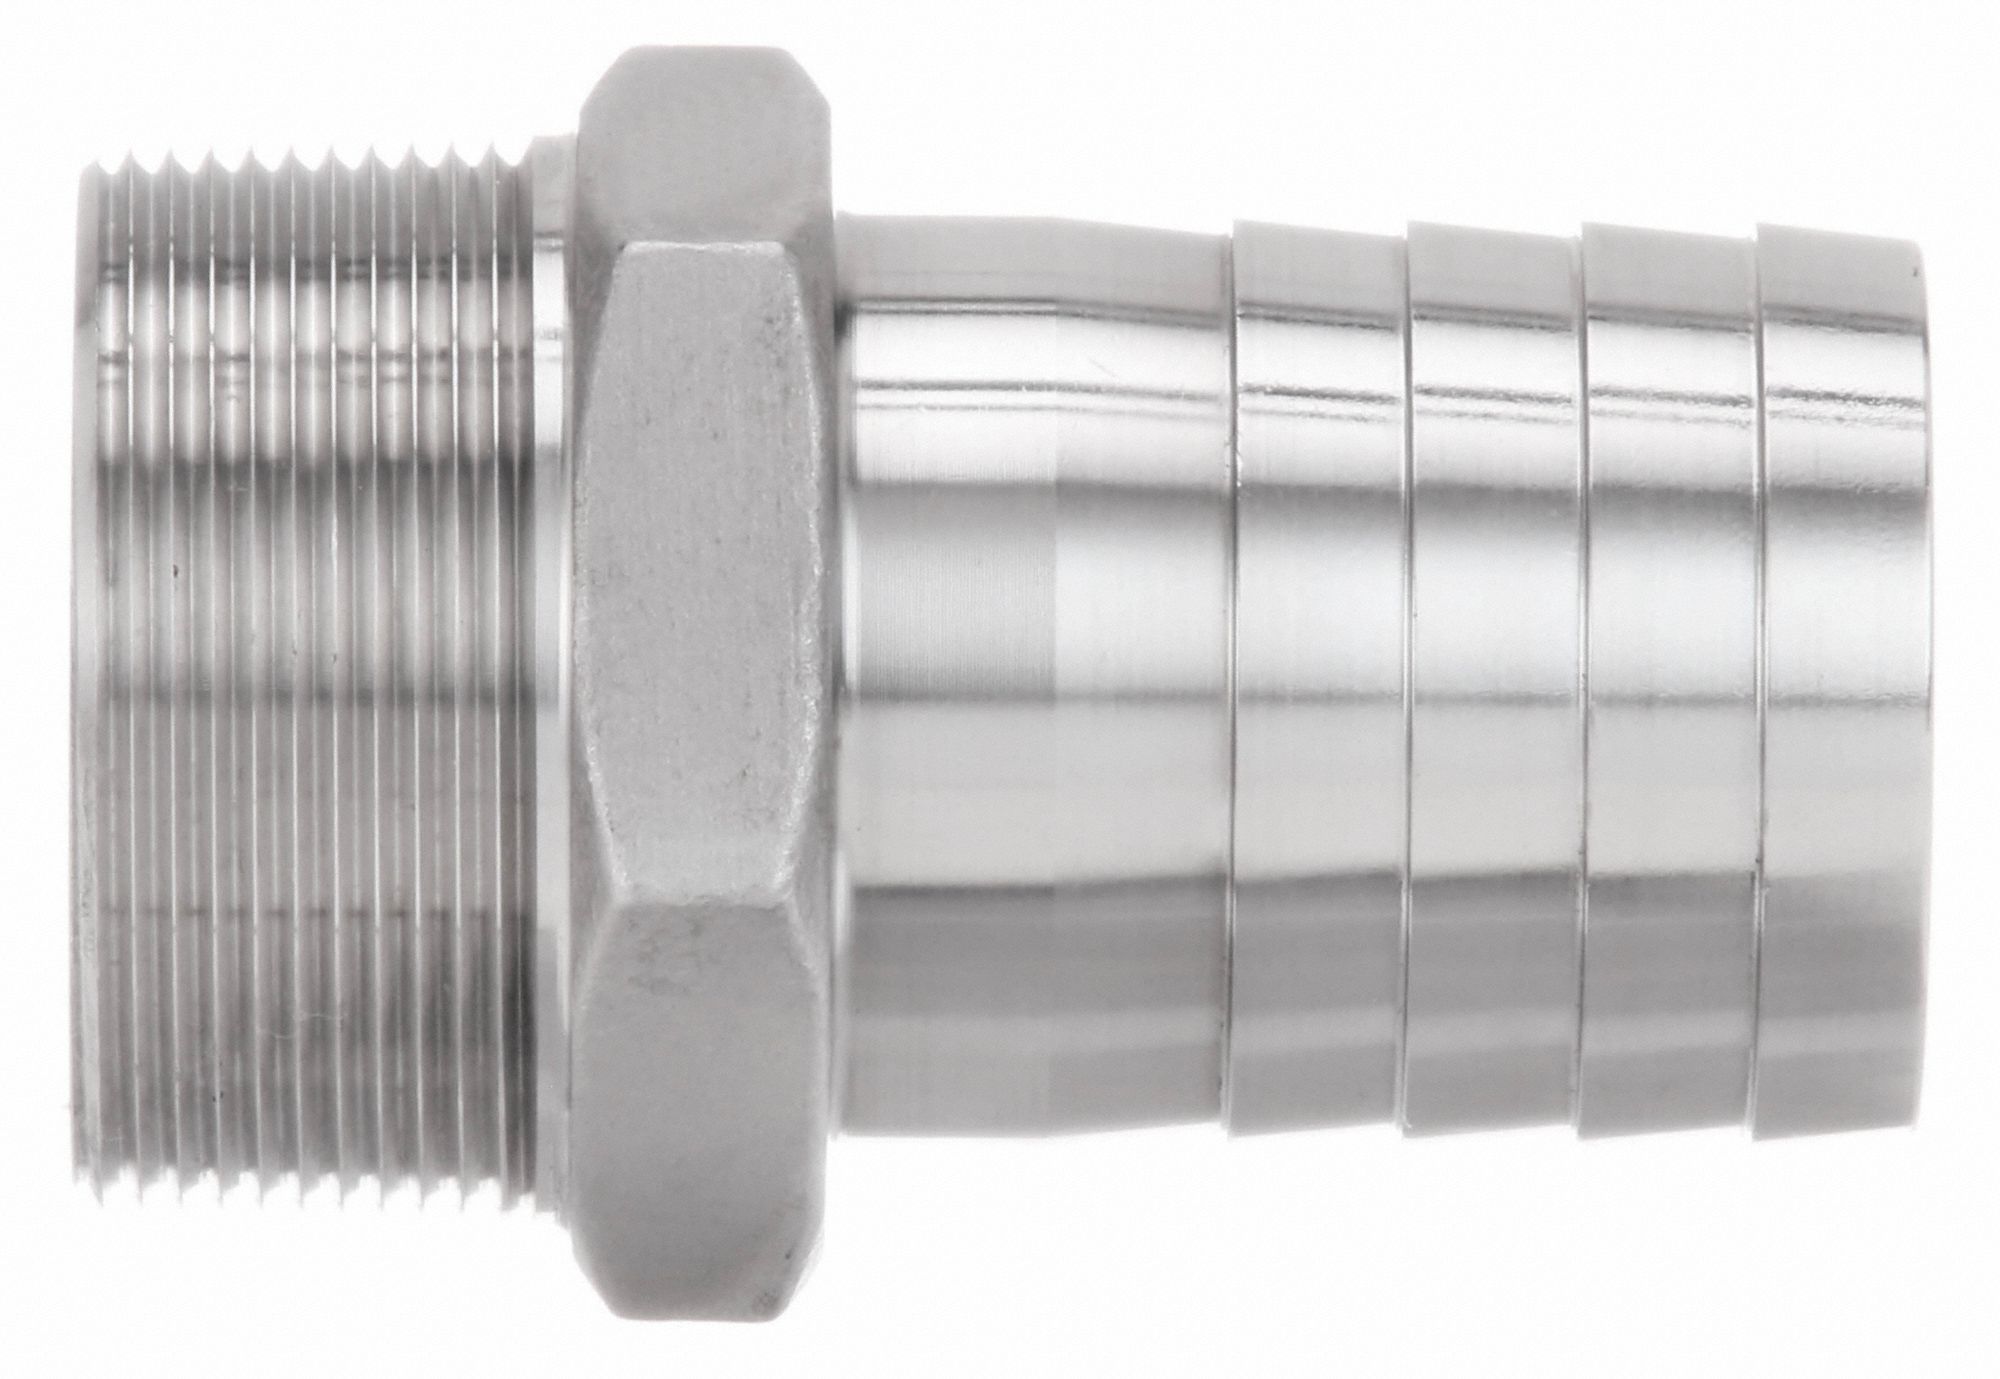 Details about   Stainless Steel Barb Hose Fitting Connector 25mm Barbed x G1 Male Pipe 2pcs 